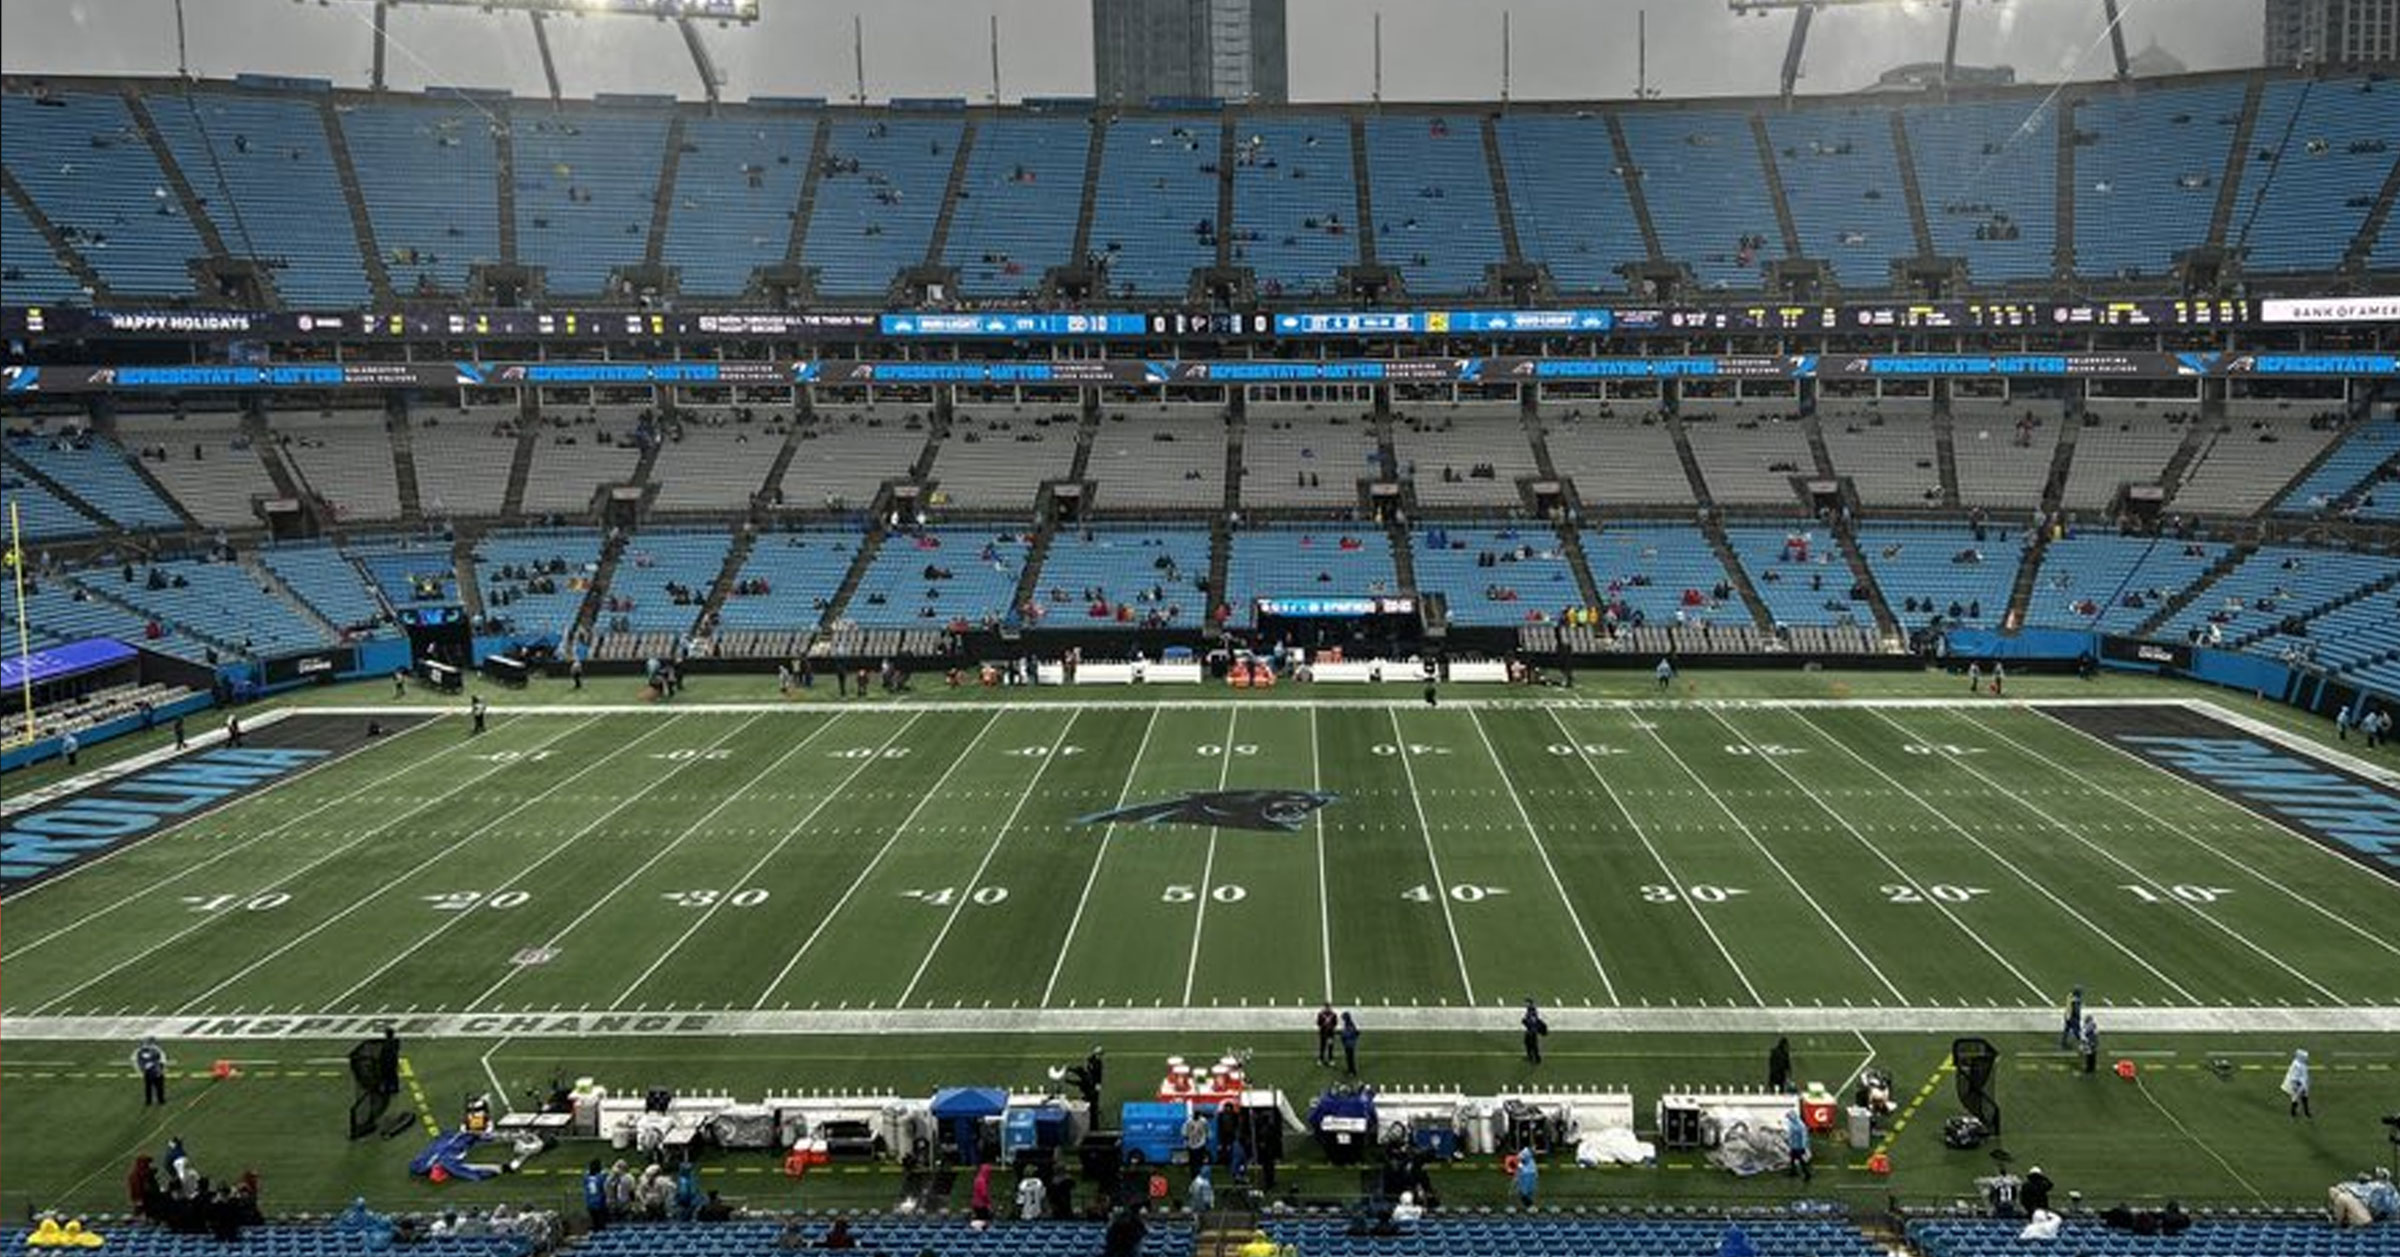 Carolina Panthers Stadium Minutes Before Kickoff Had About 100 Fans In